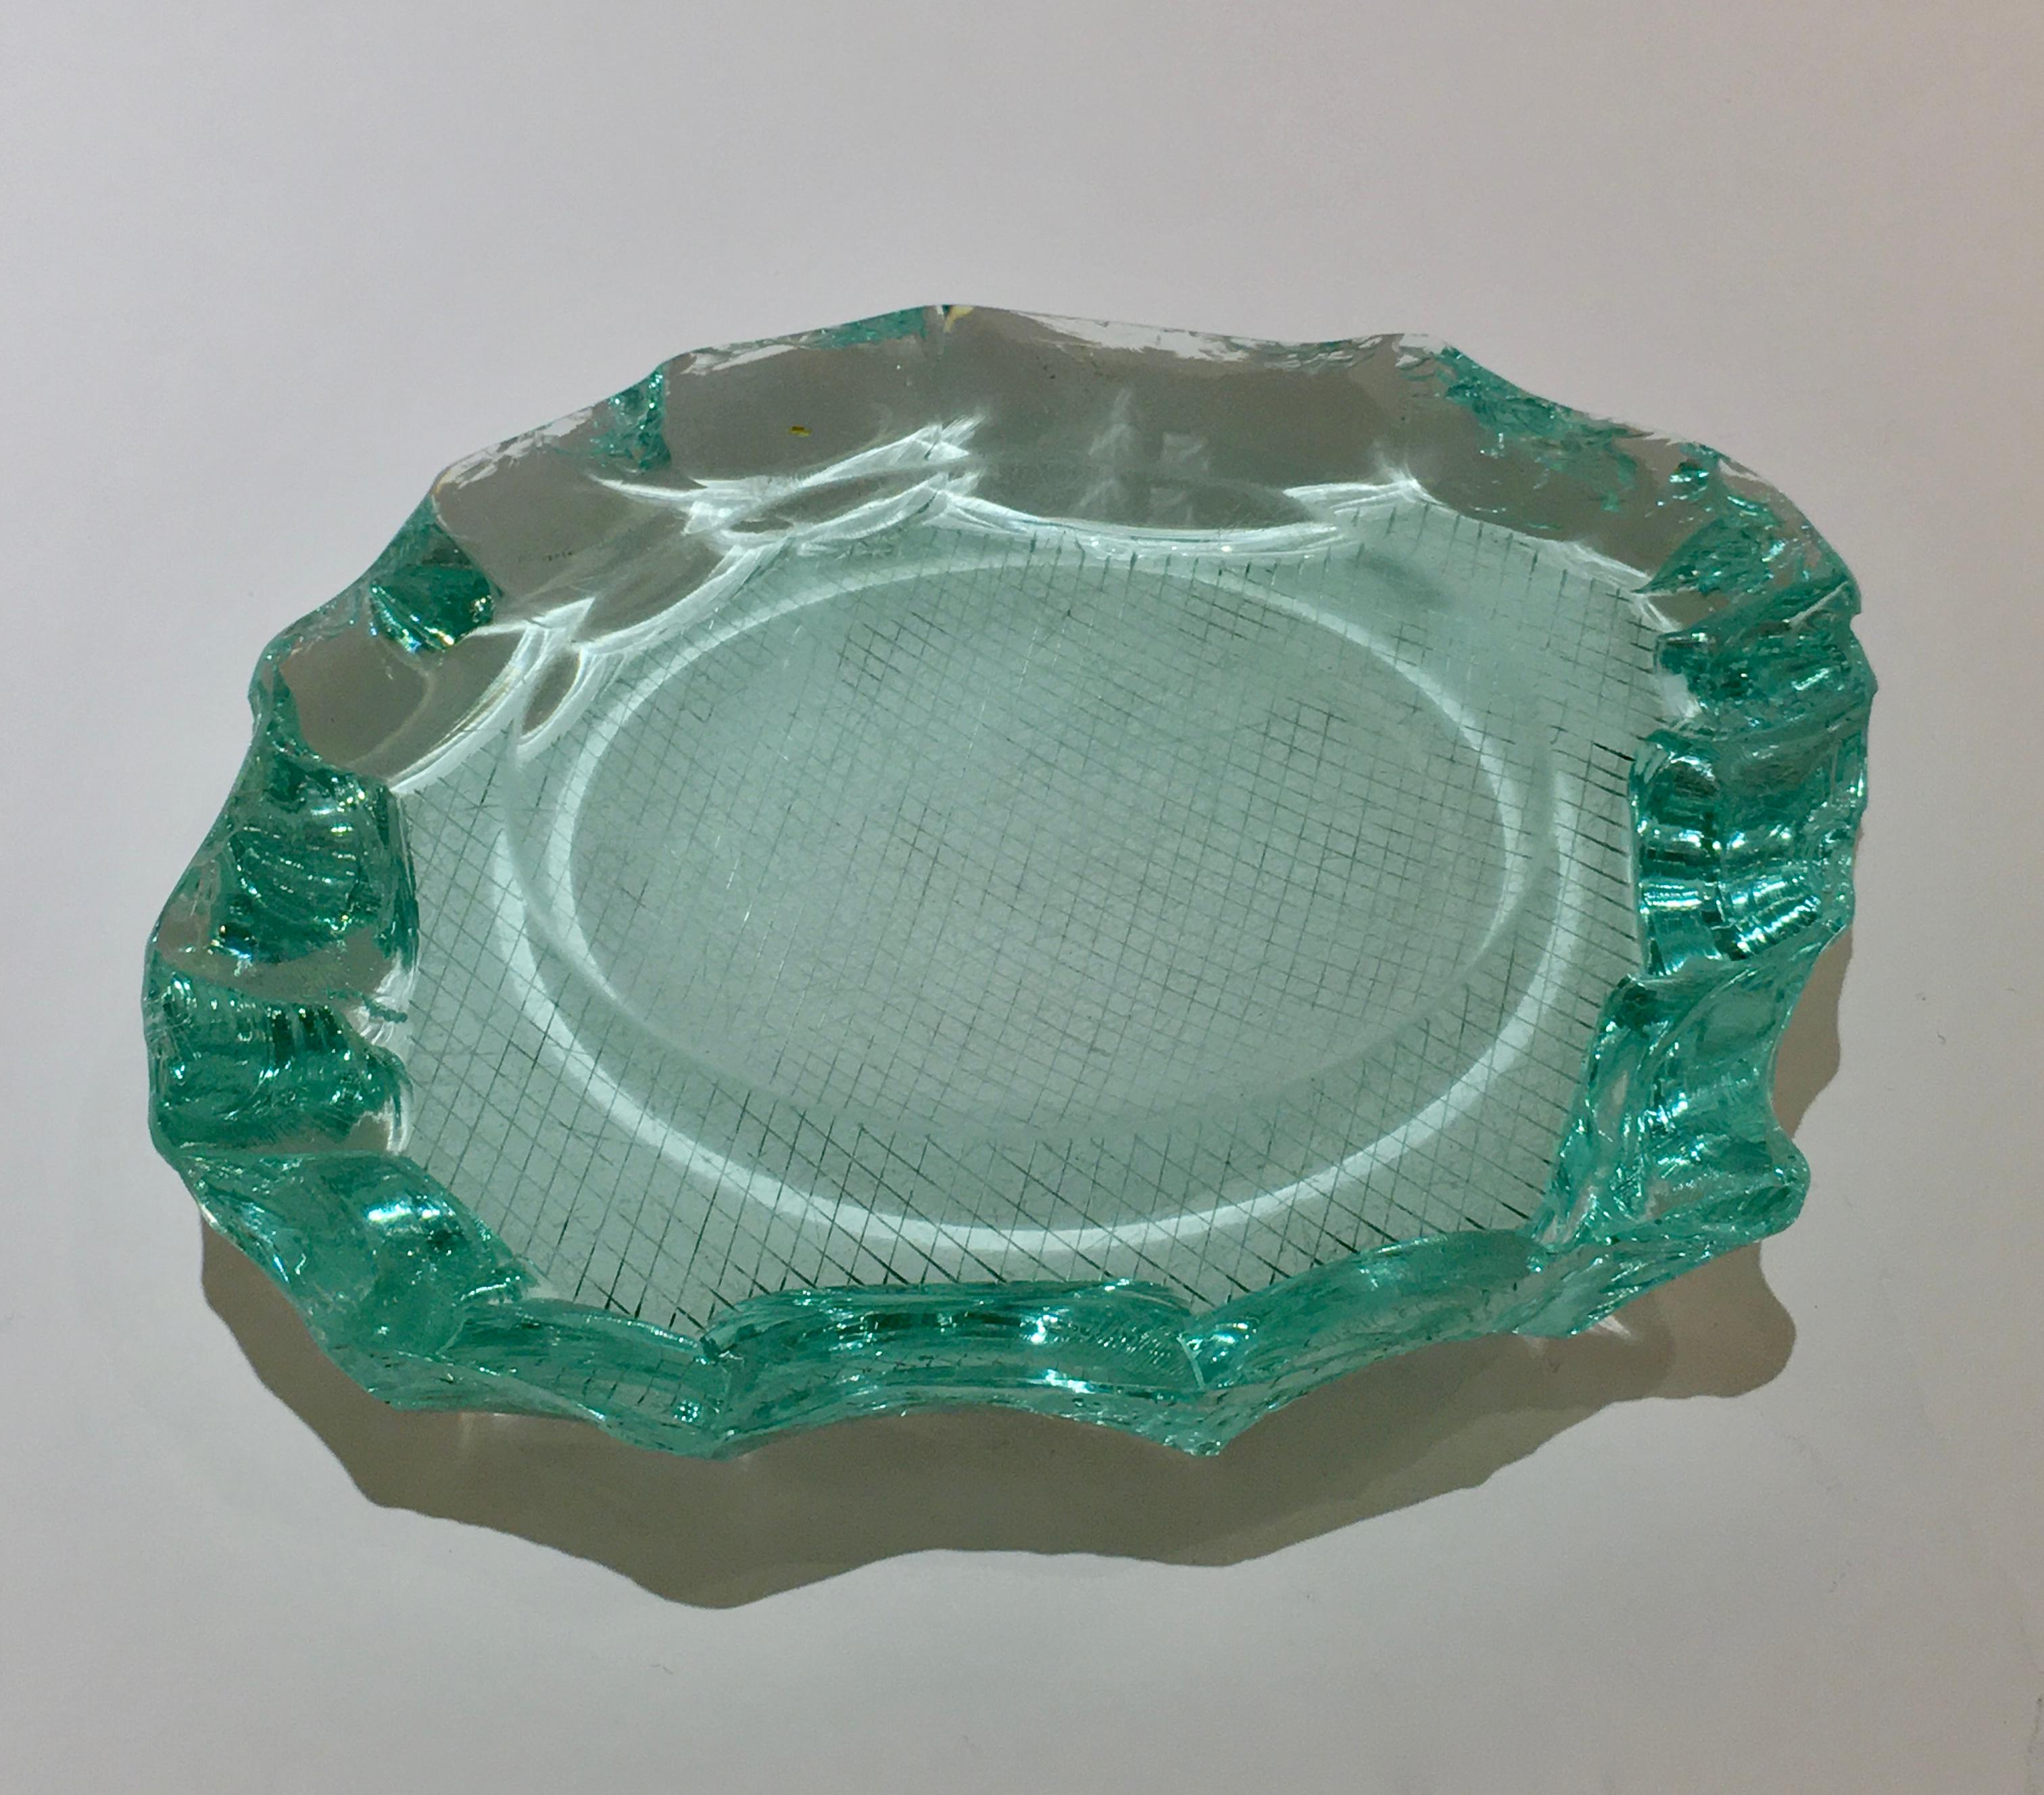 A circa 1930 ‘scalpellato’ handcut glass dish designed by Pietro Chiesa for Fontana Arte. The beautiful aquamarine coloured glass was produced using the ‘scalpellato’ or ‘chiselled’ technique and has a circular concave cut-out at its centre. The